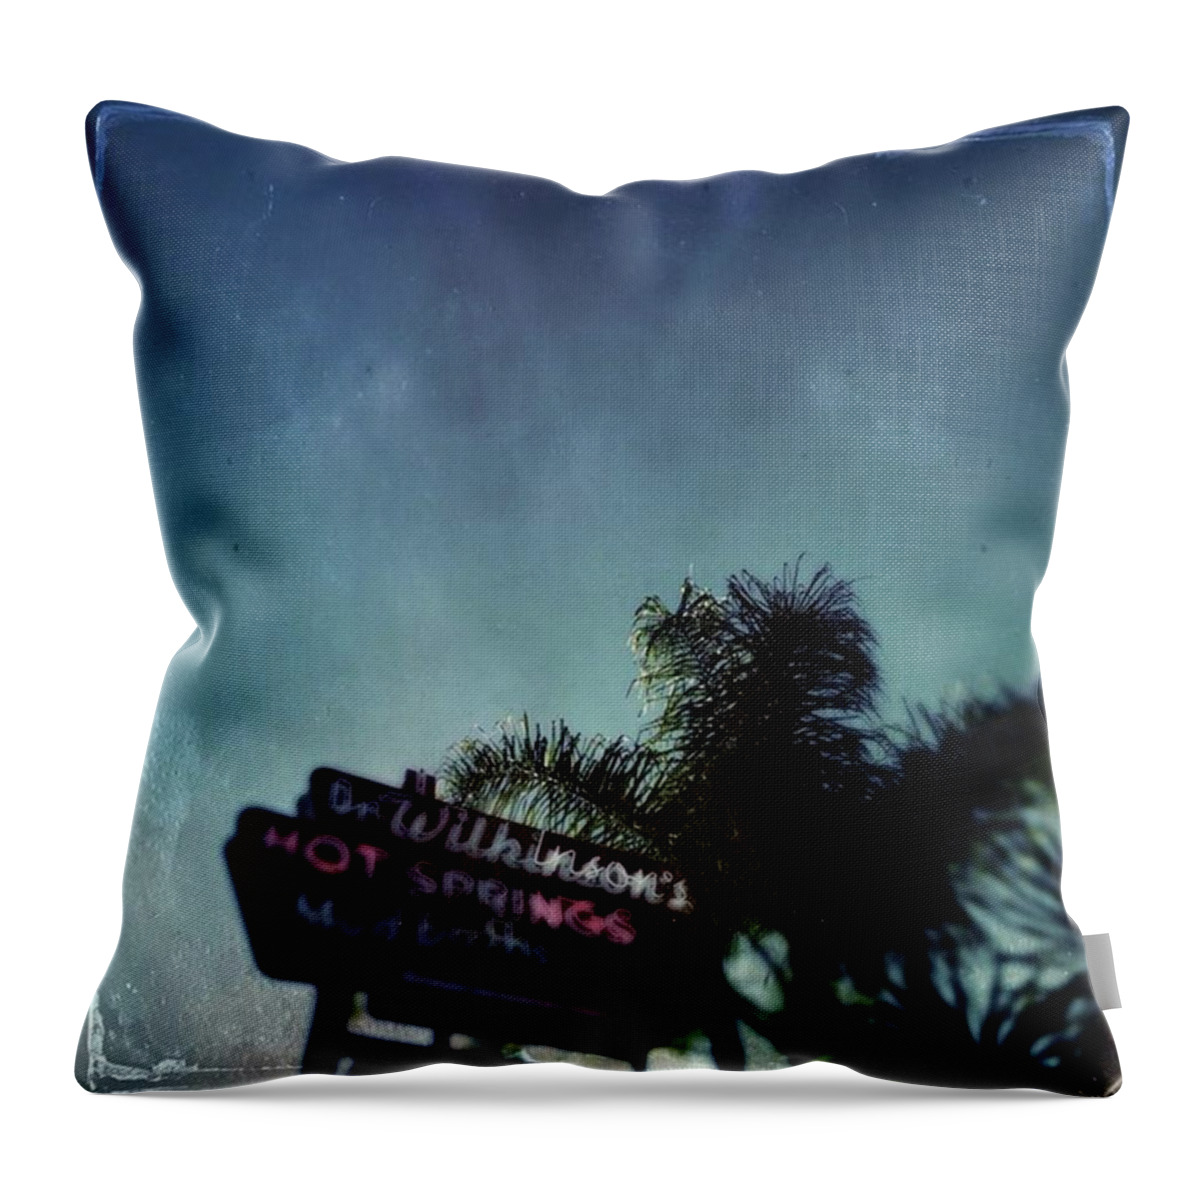 Tintypeapp Throw Pillow featuring the photograph Dr Wilkenson's Hot Springs And Mud by Ginger Oppenheimer